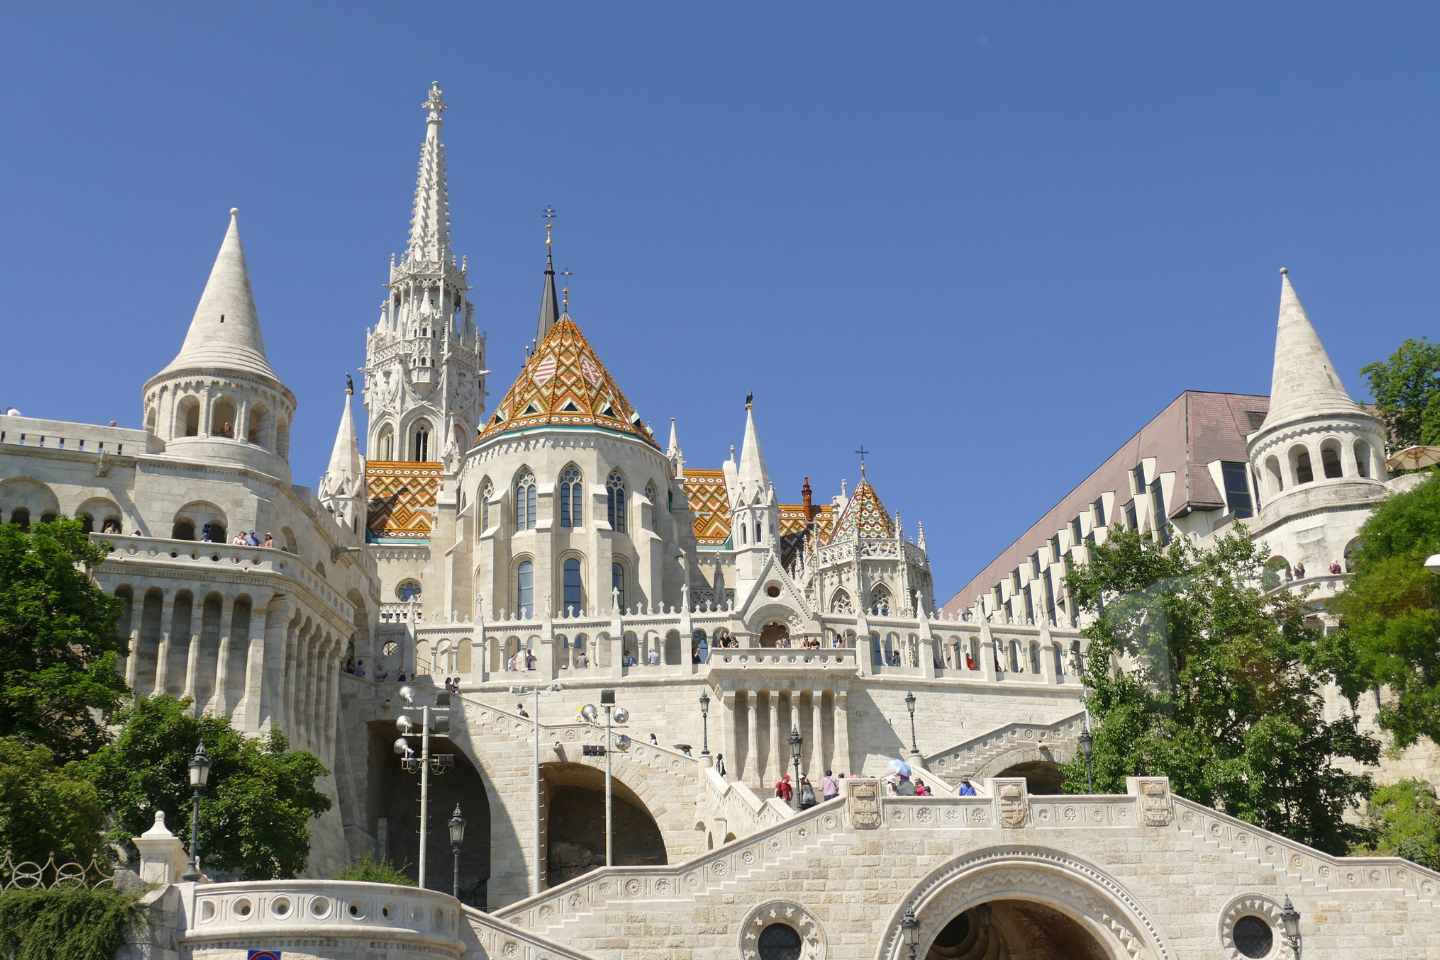 Budapest: A Tale of Two Cities Along the Danube